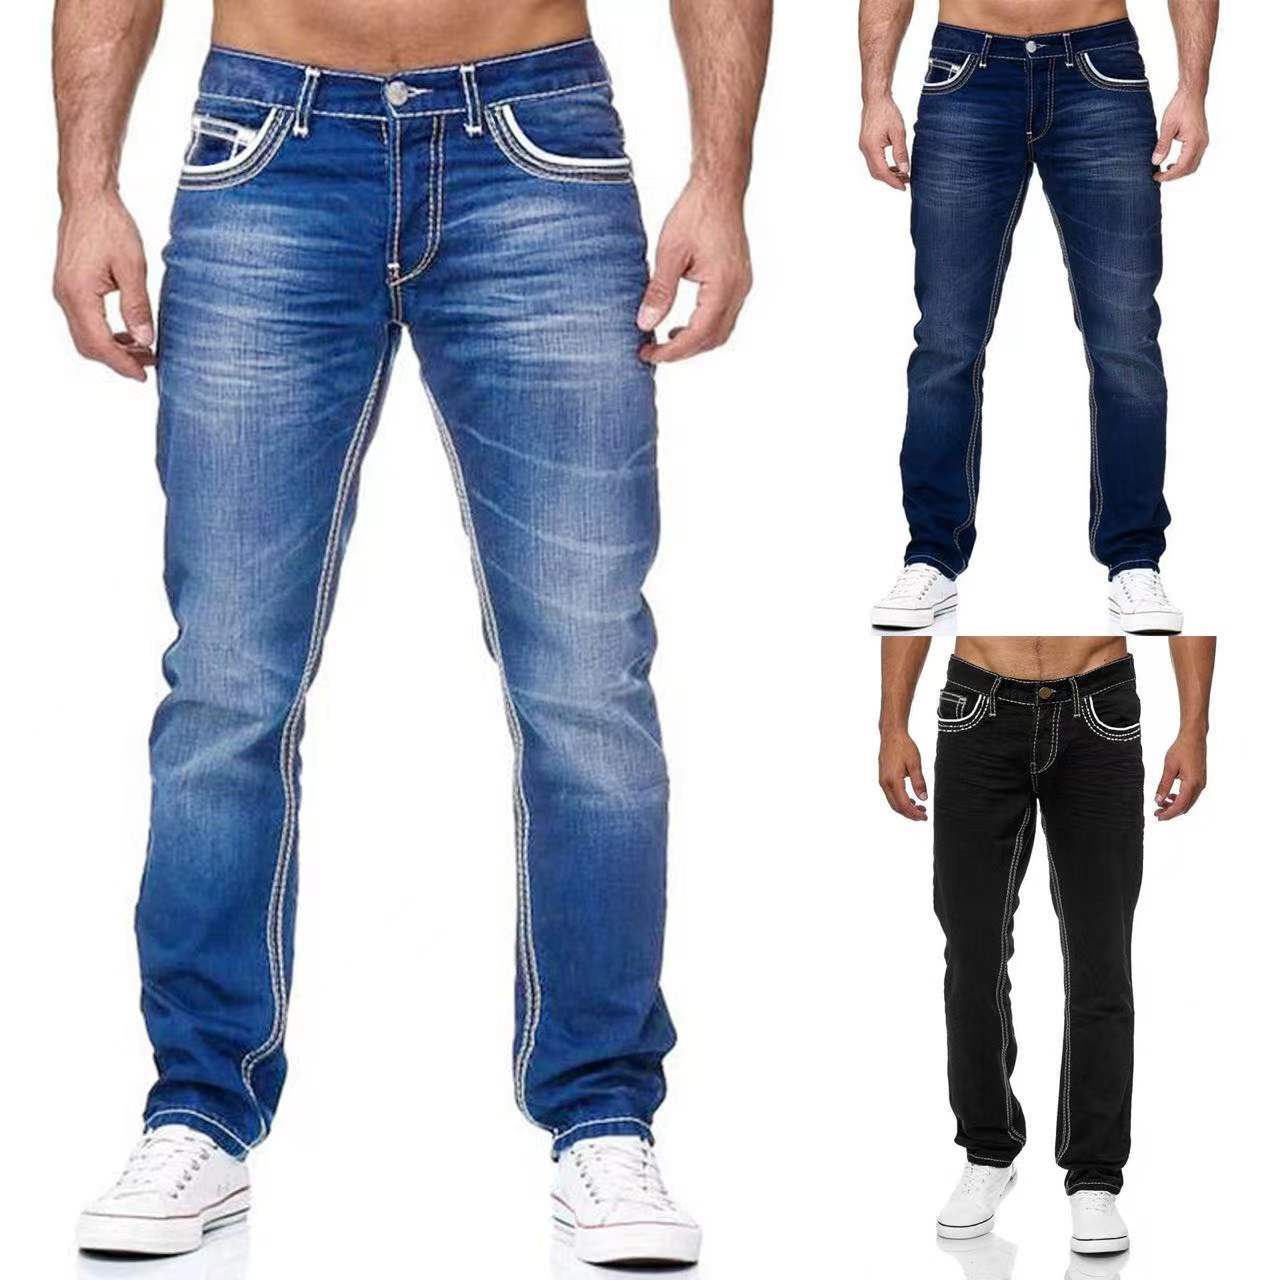   European and American High Quality Wish New Men's Slim Double ine Jeans Amazon SATINE Three Color Jeans New